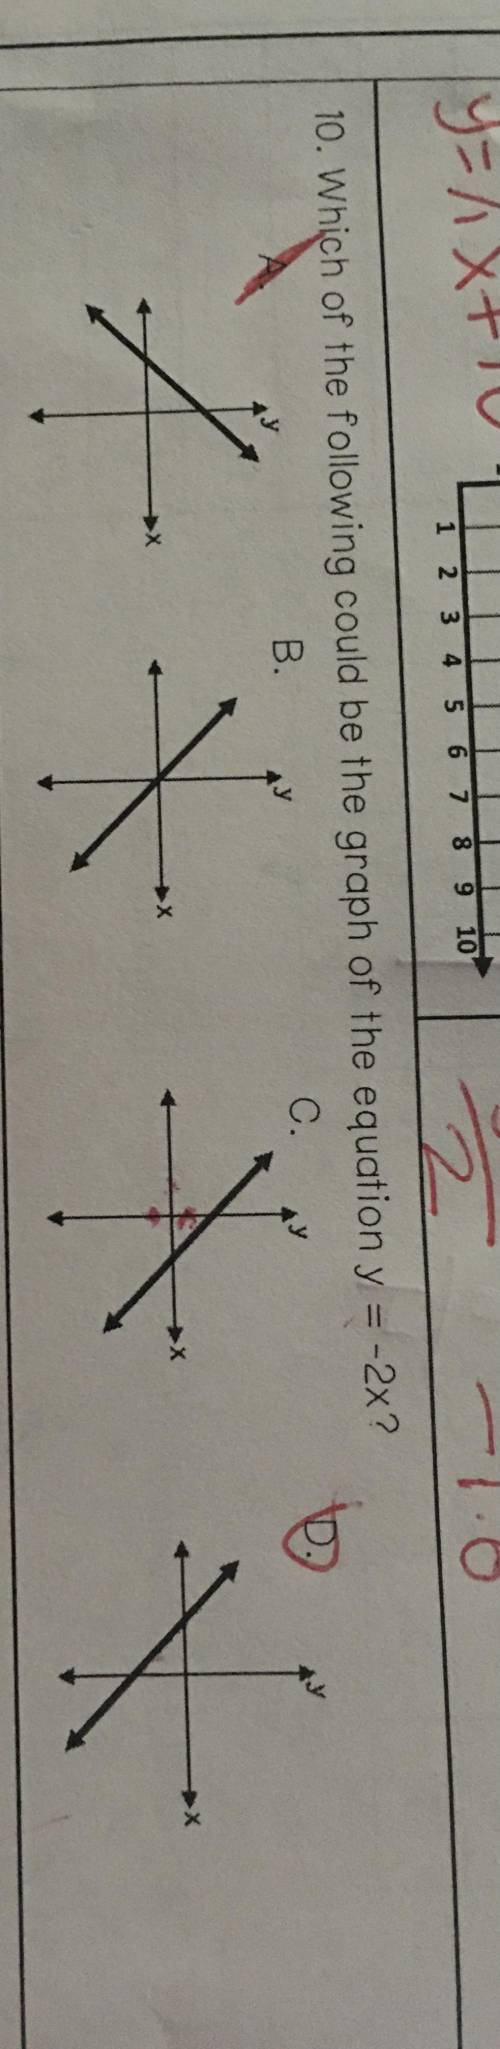 Help! ignore the answer choice i circled its wrong...